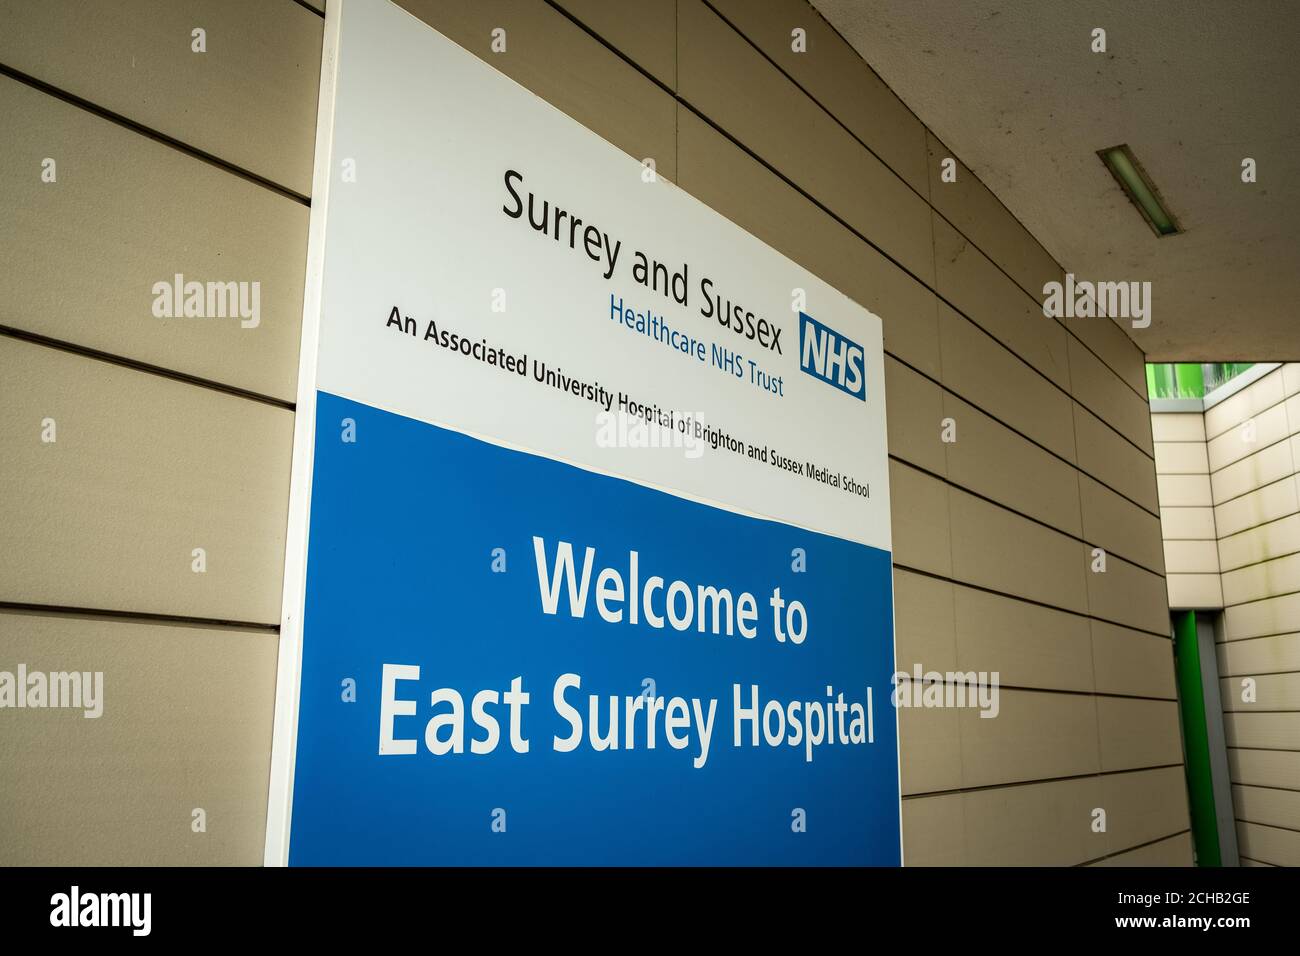 East Surrey Hospital, NHS Hospital in Surrey south east England Stock Photo